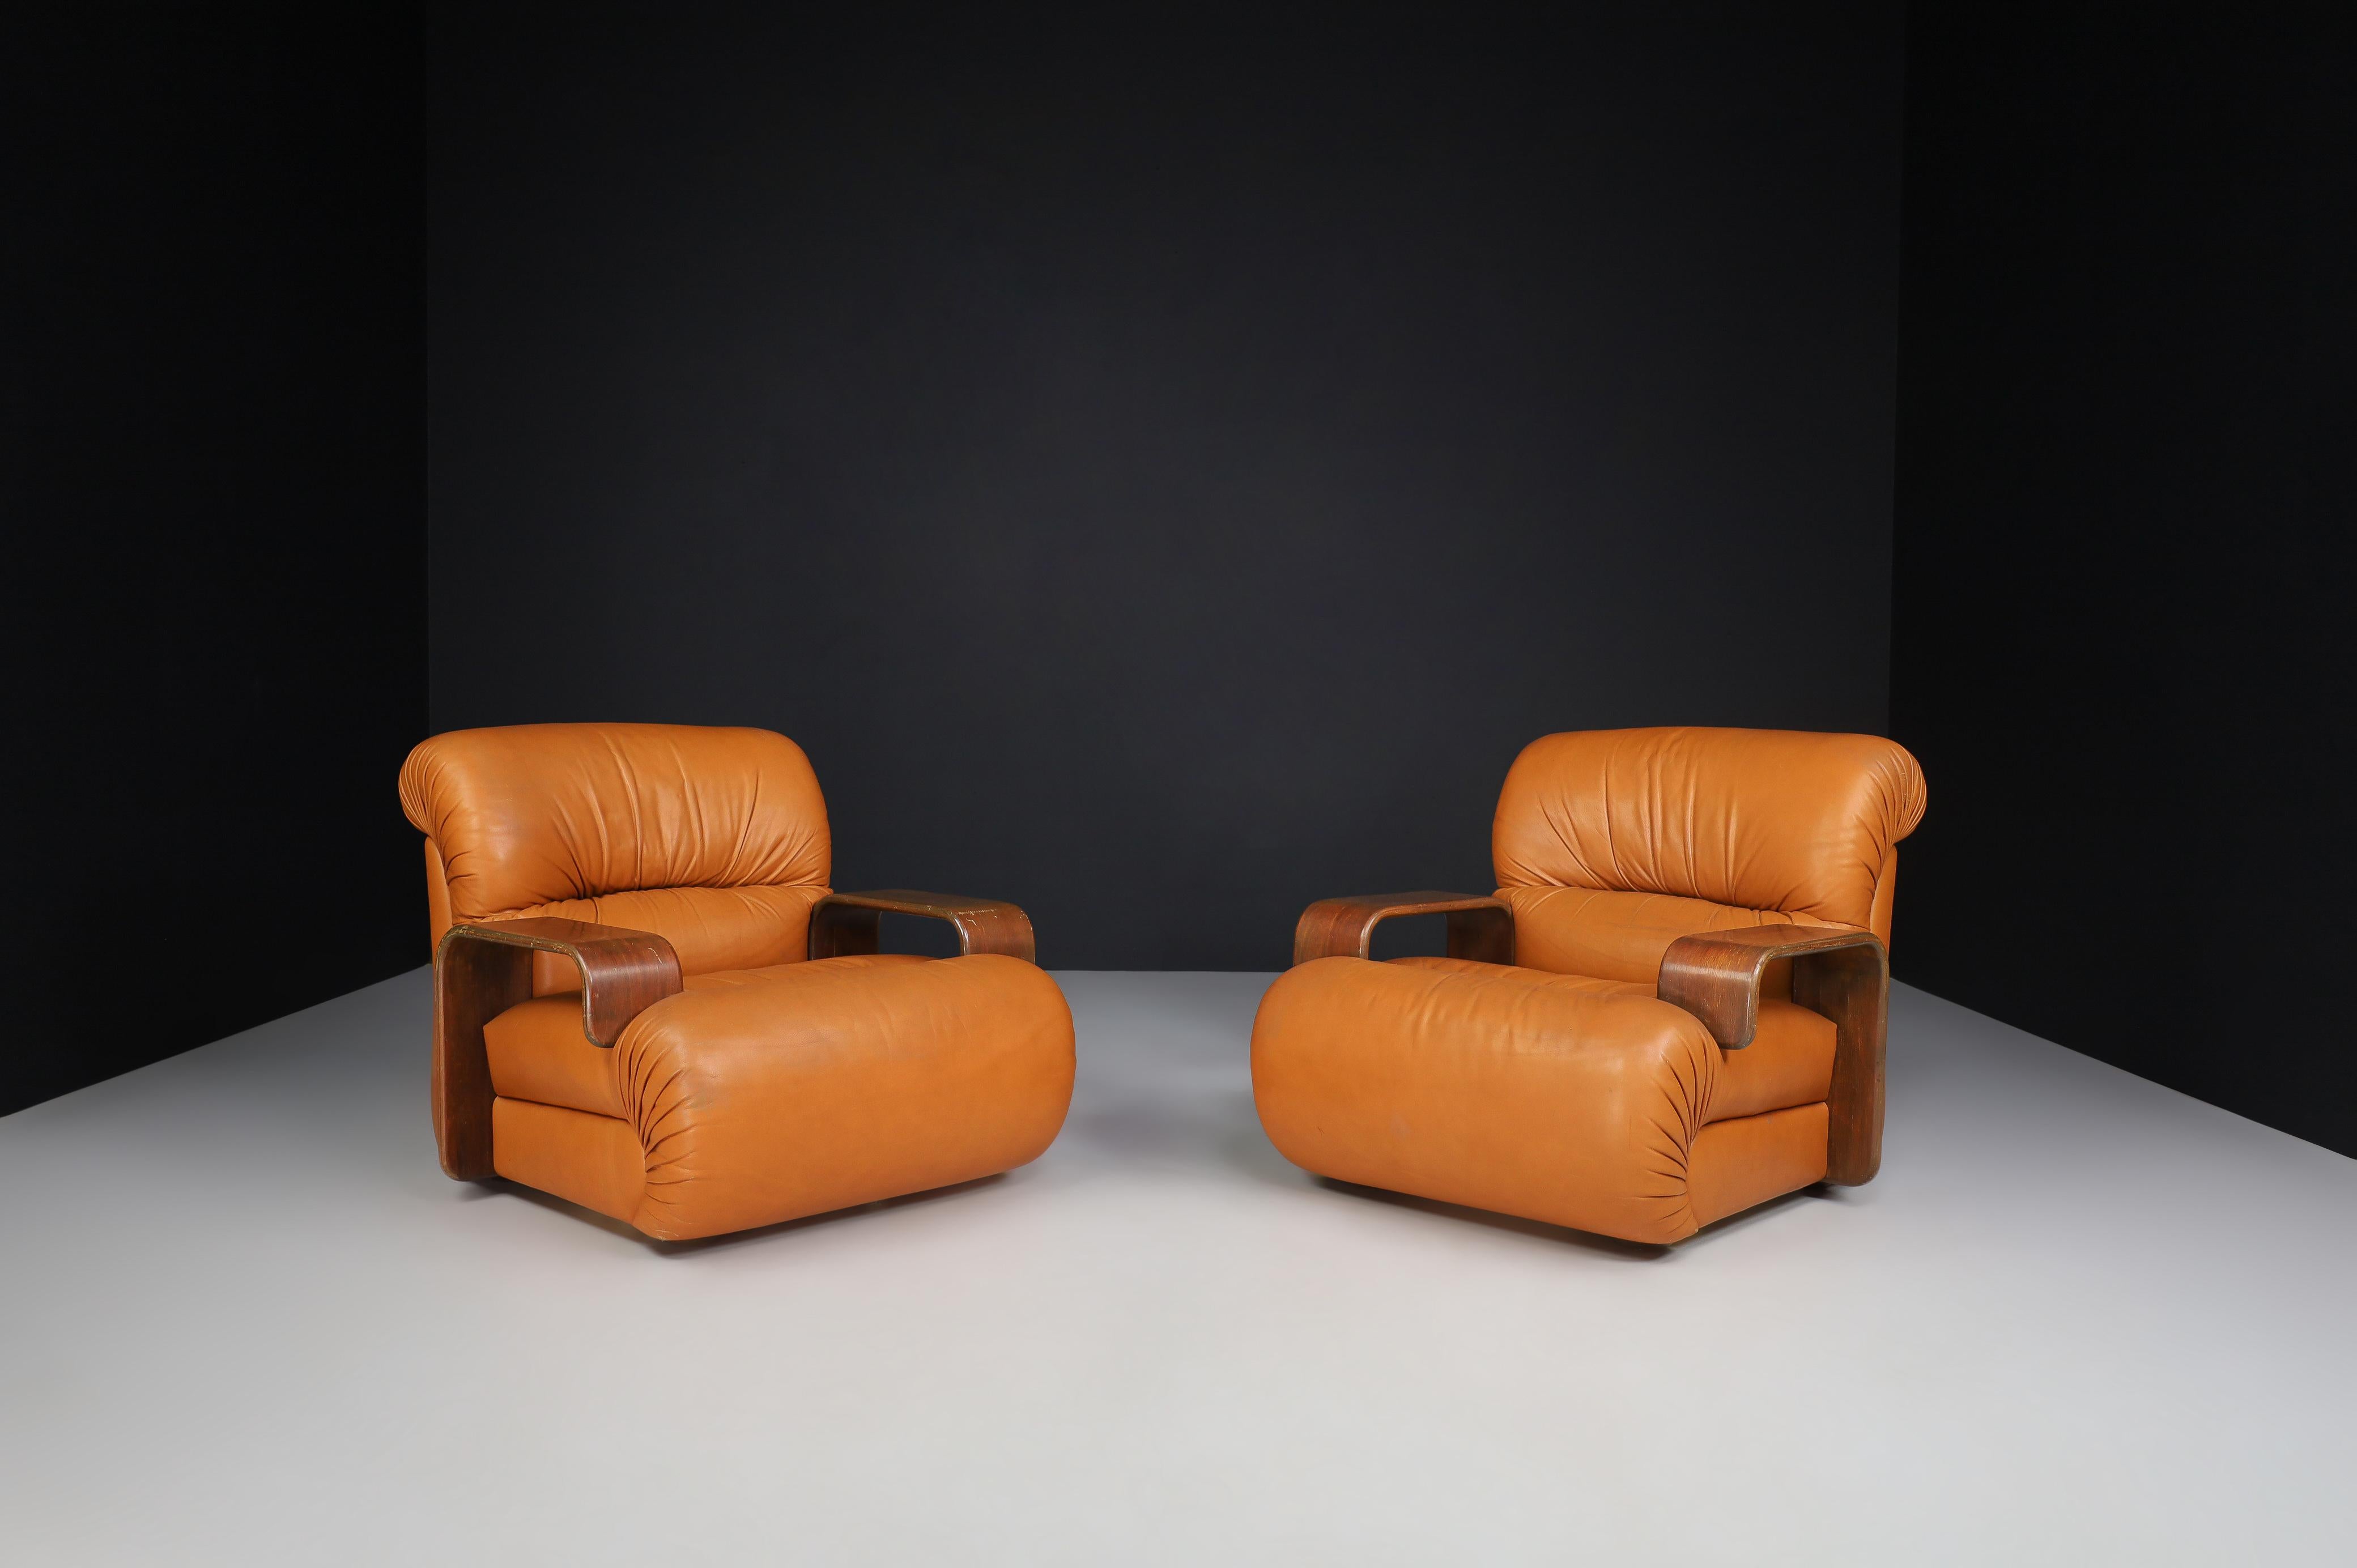 Lounge Chairs in Bentwood and Cognac Leather, Italy 1970 

A couple of big, stylish lounge armchairs that feature round lines and shapes invite you to take a seat and relax—designed and produced in Italy in the 1970s. Generously proportioned brown